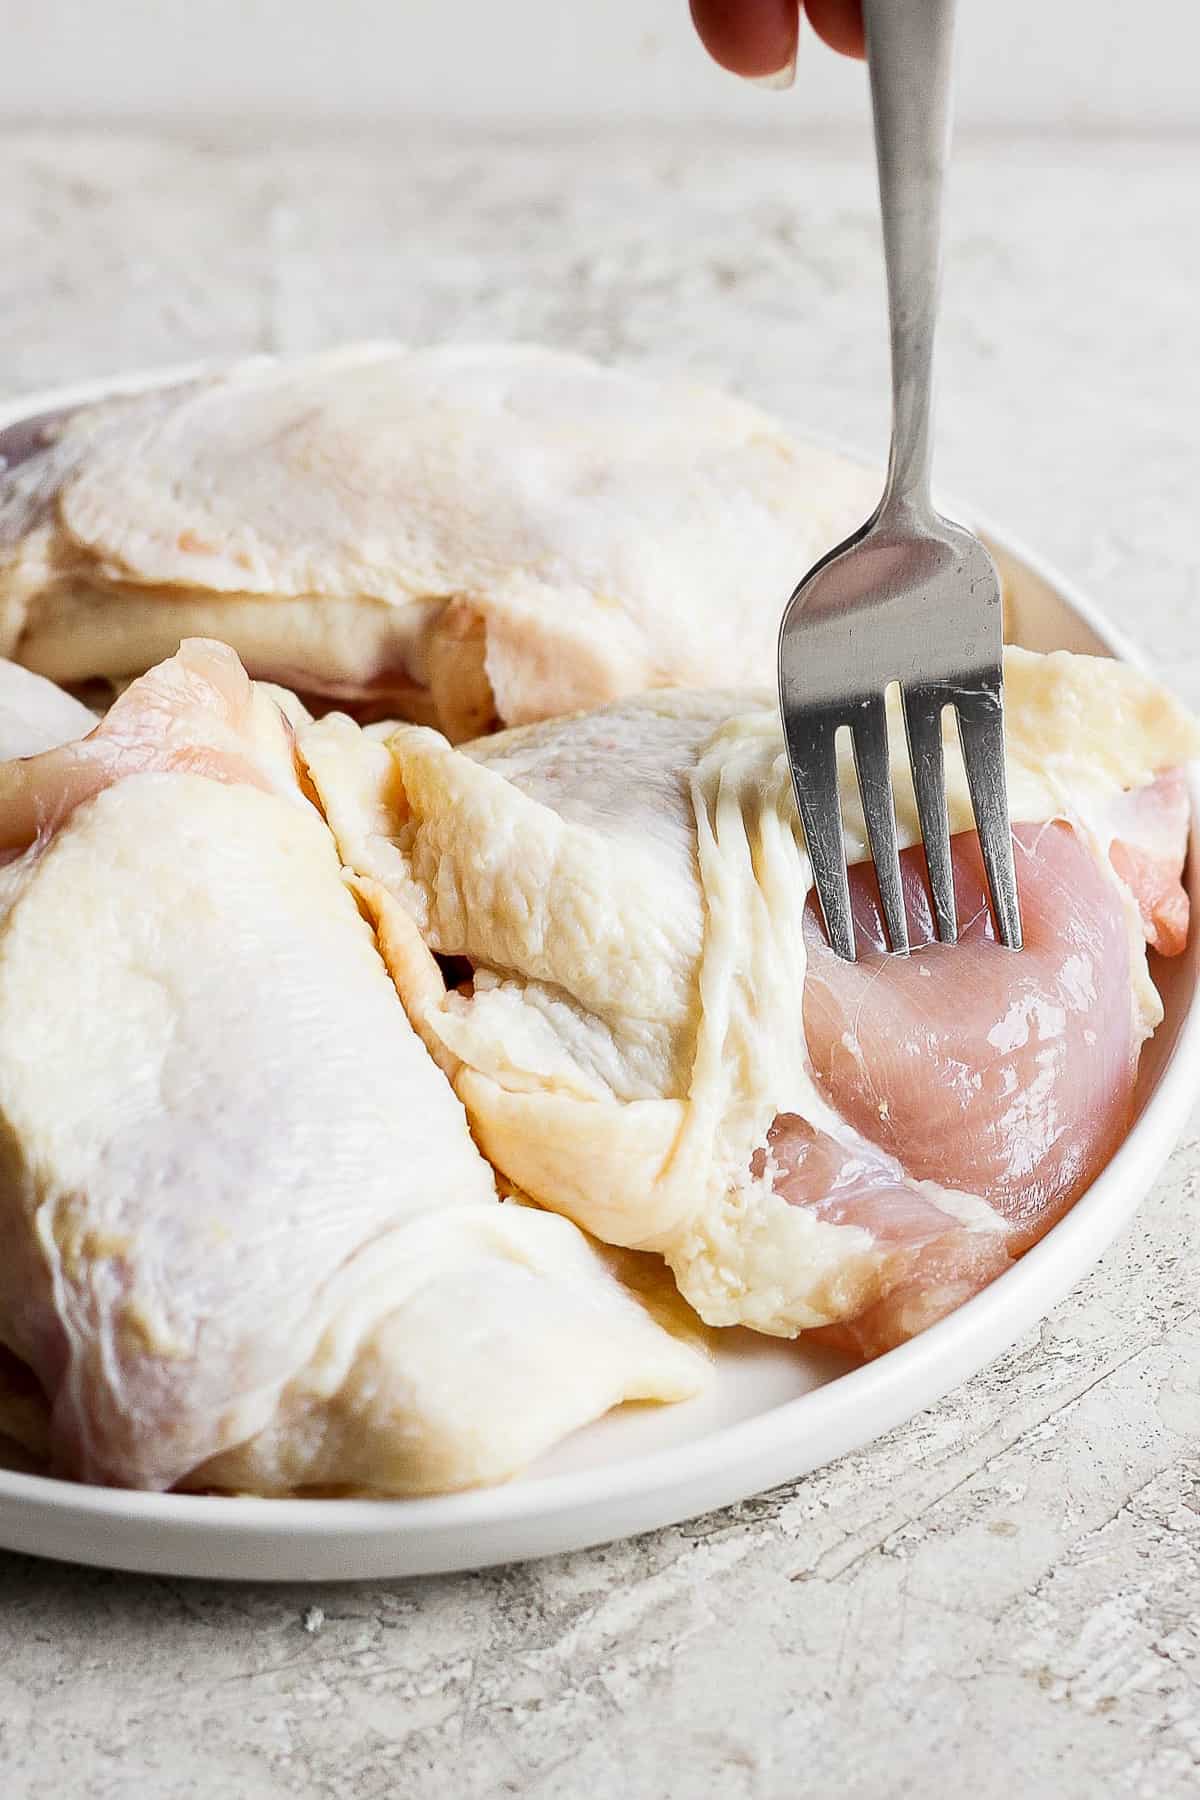 Chicken thighs being pricked with a fork.